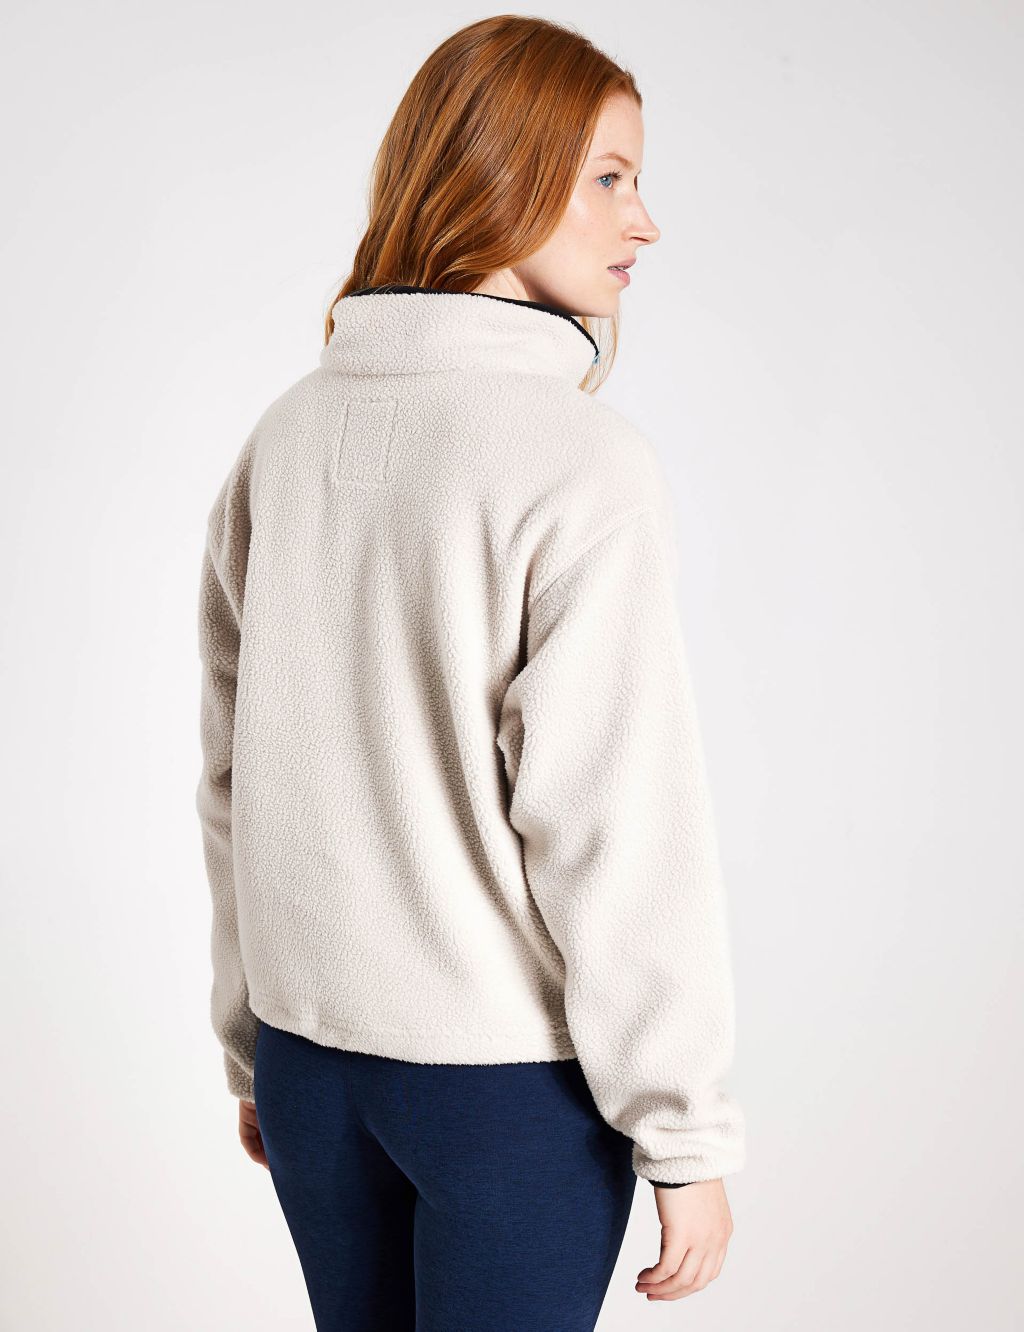 Helvetia Funnel Neck Cropped Jacket image 3